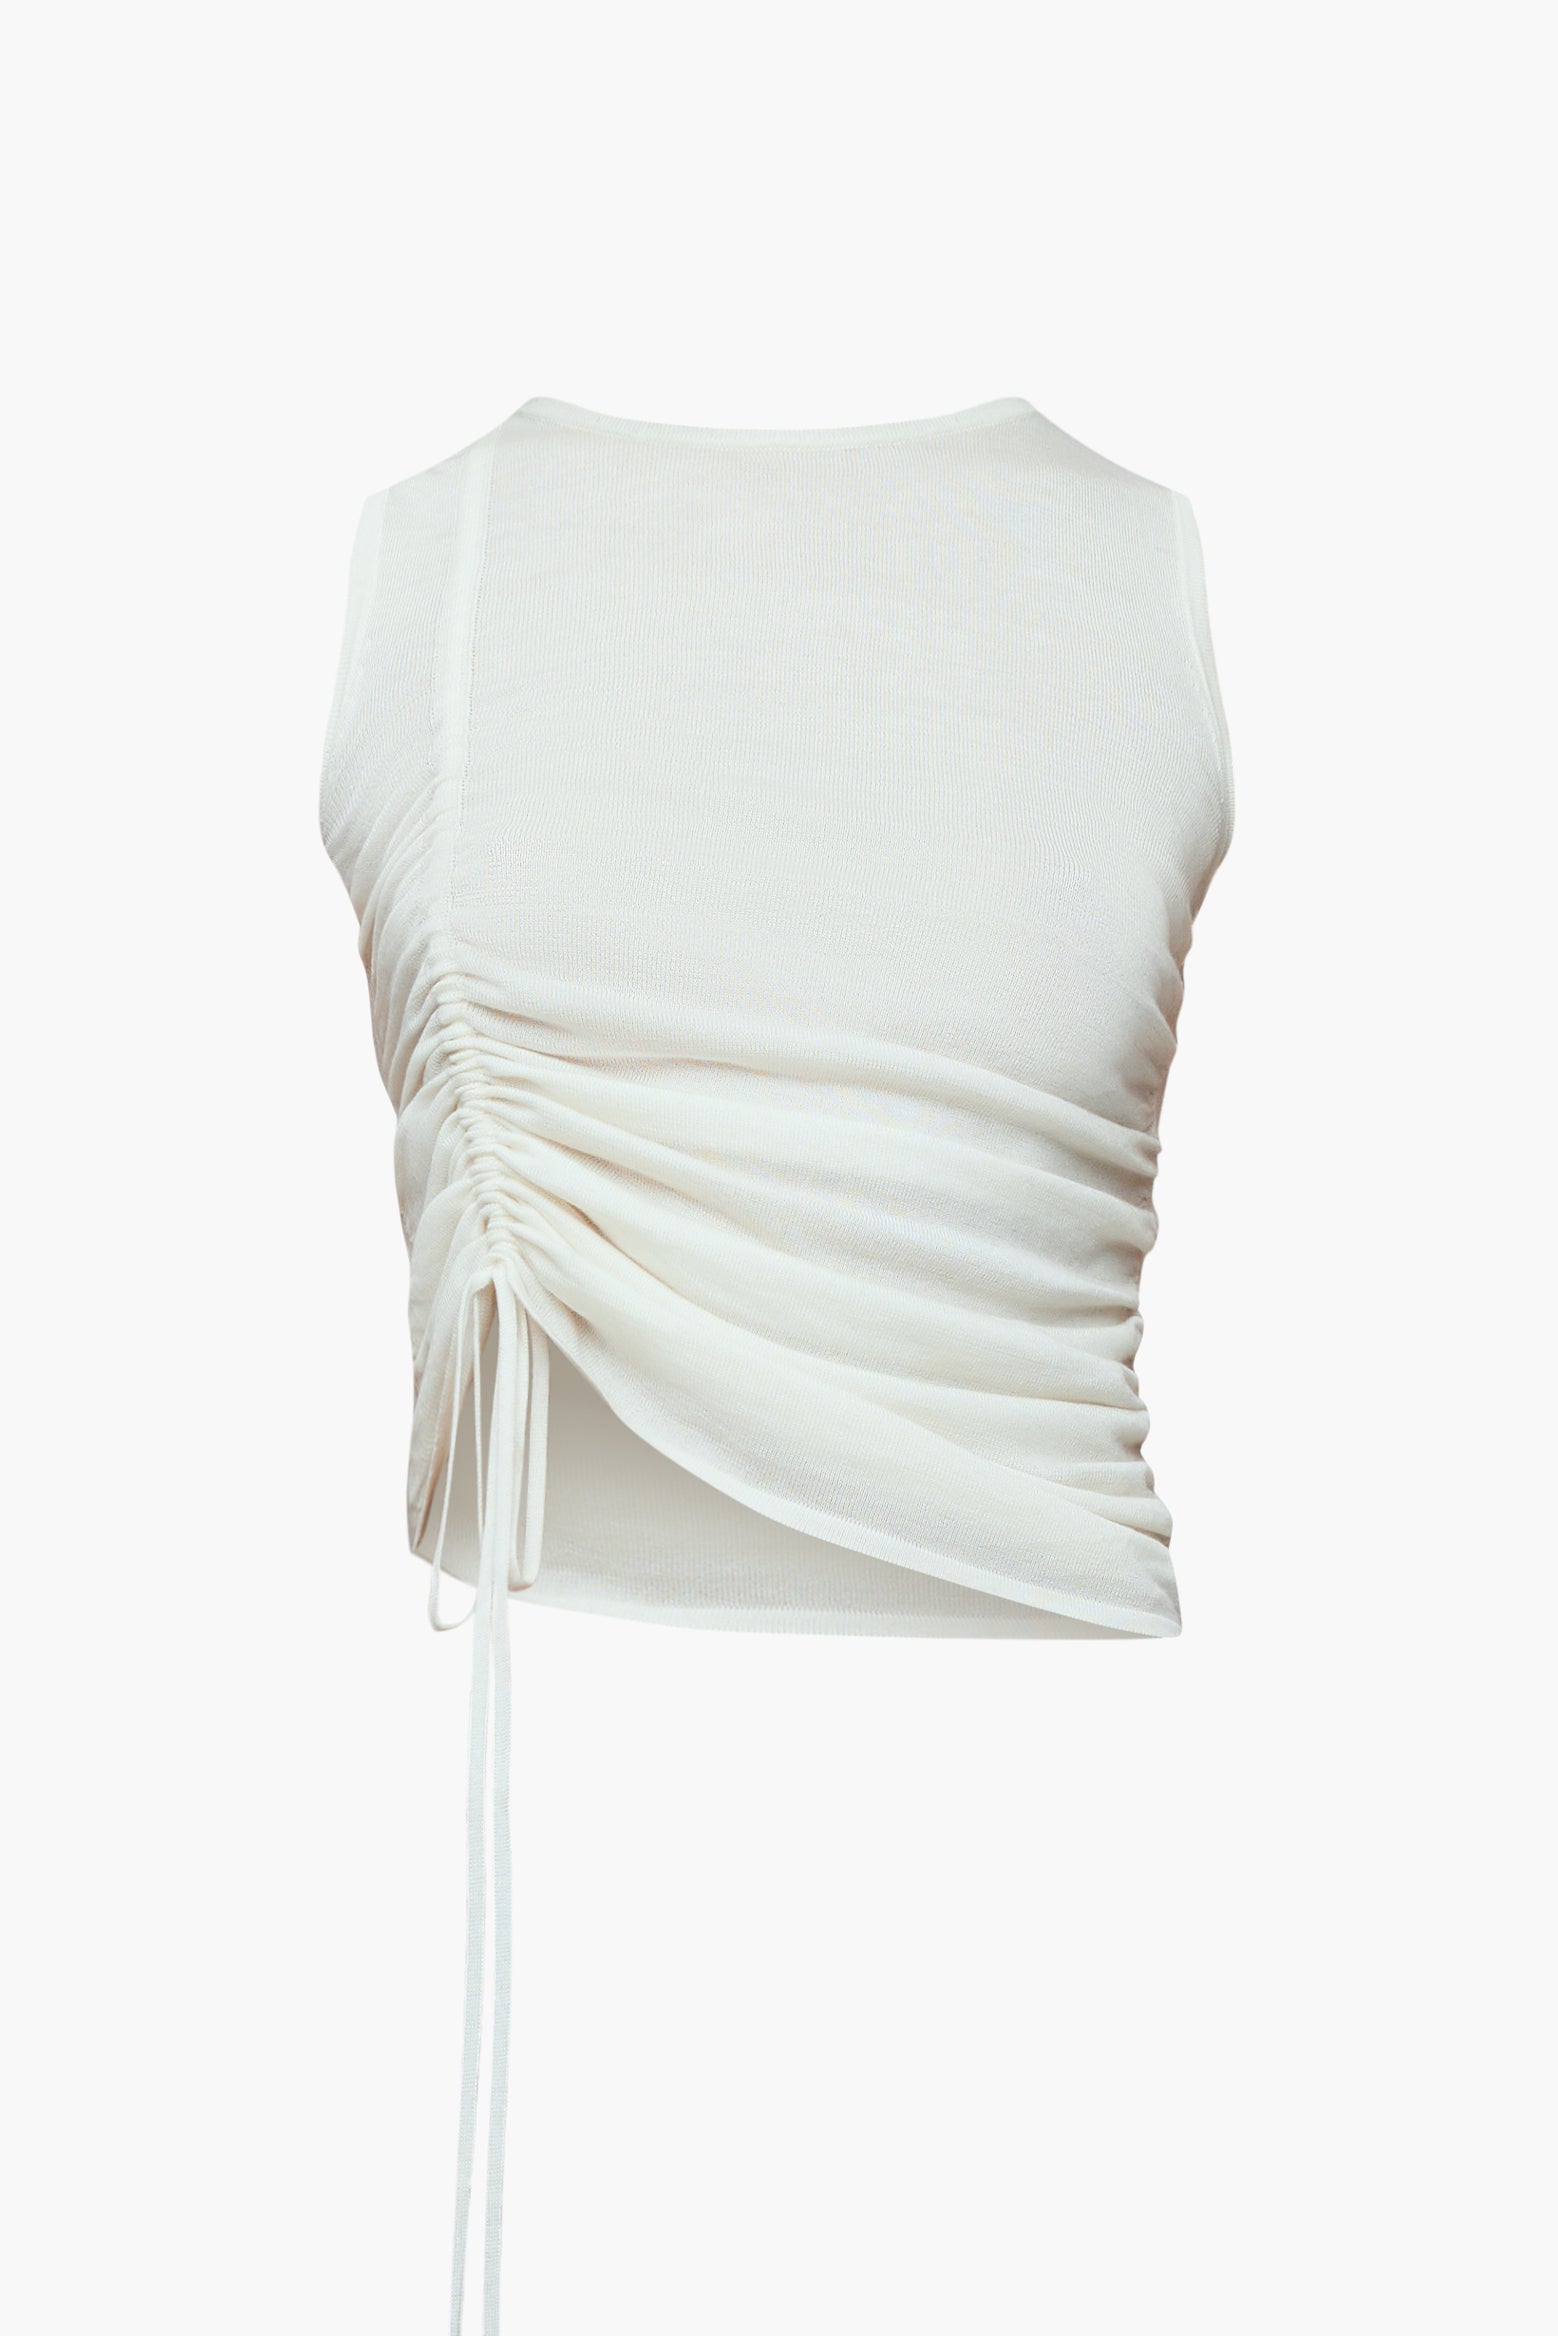 Wynn Hamlyn Nadine Top in Ivory available at The New Trend Australia. 